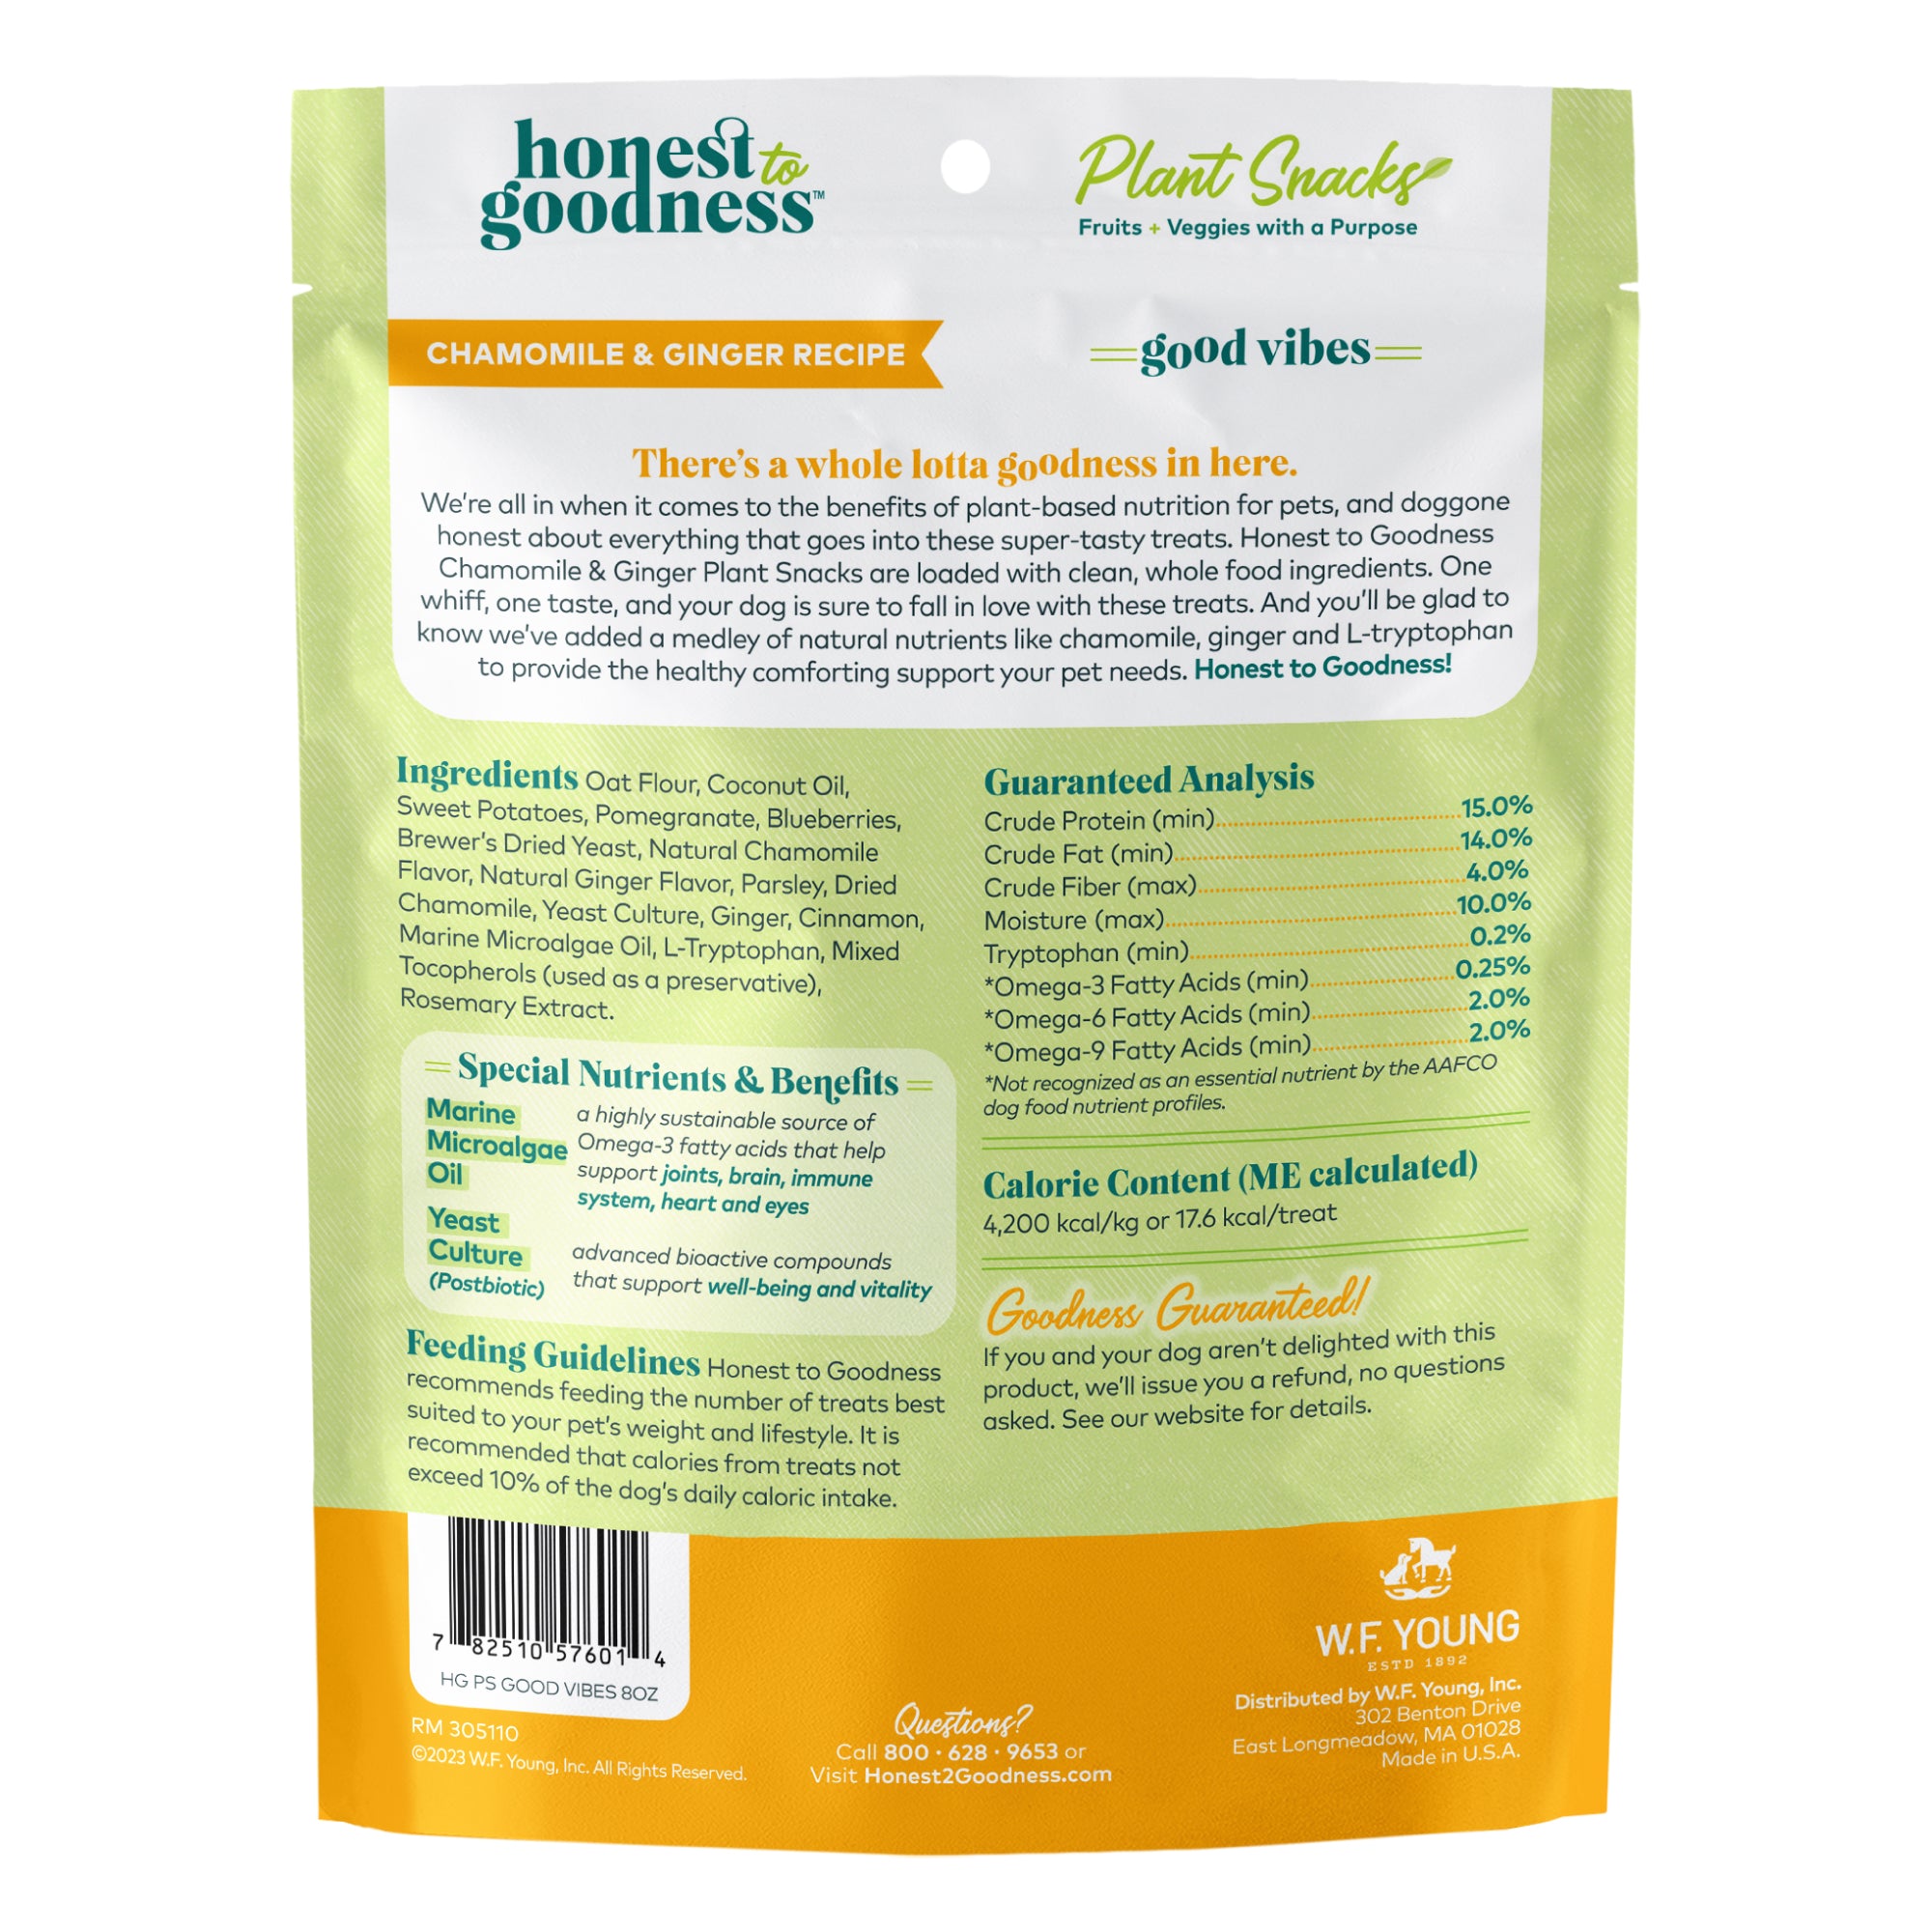 Honest to Goodness Good Vibes chamomile & ginger recipe back of bag showing ingredients.